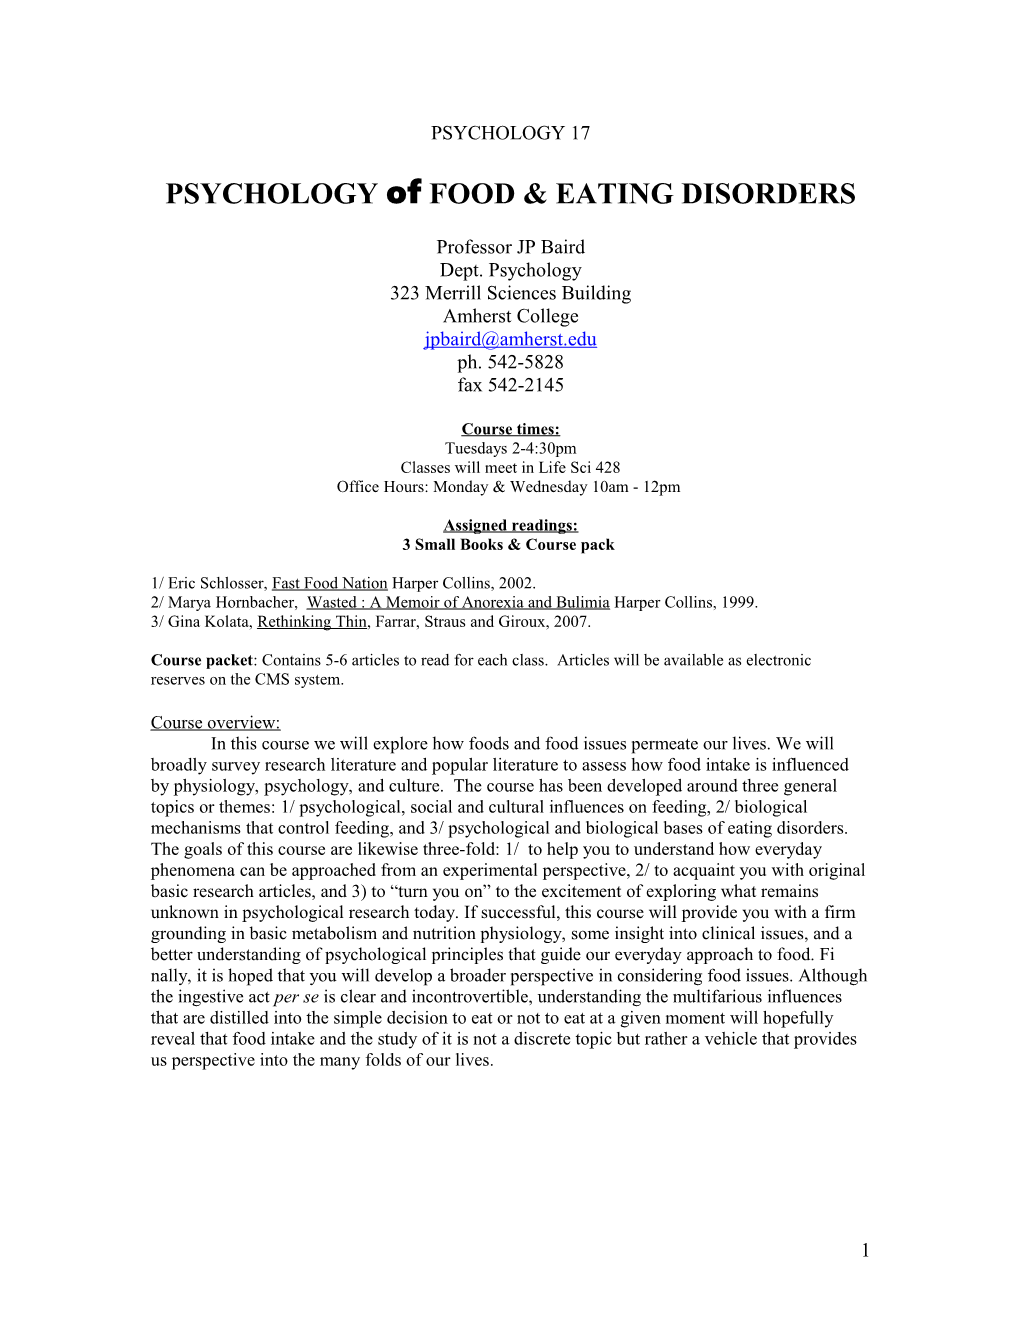 PSYCHOLOGY of FOOD & EATING DISORDERS